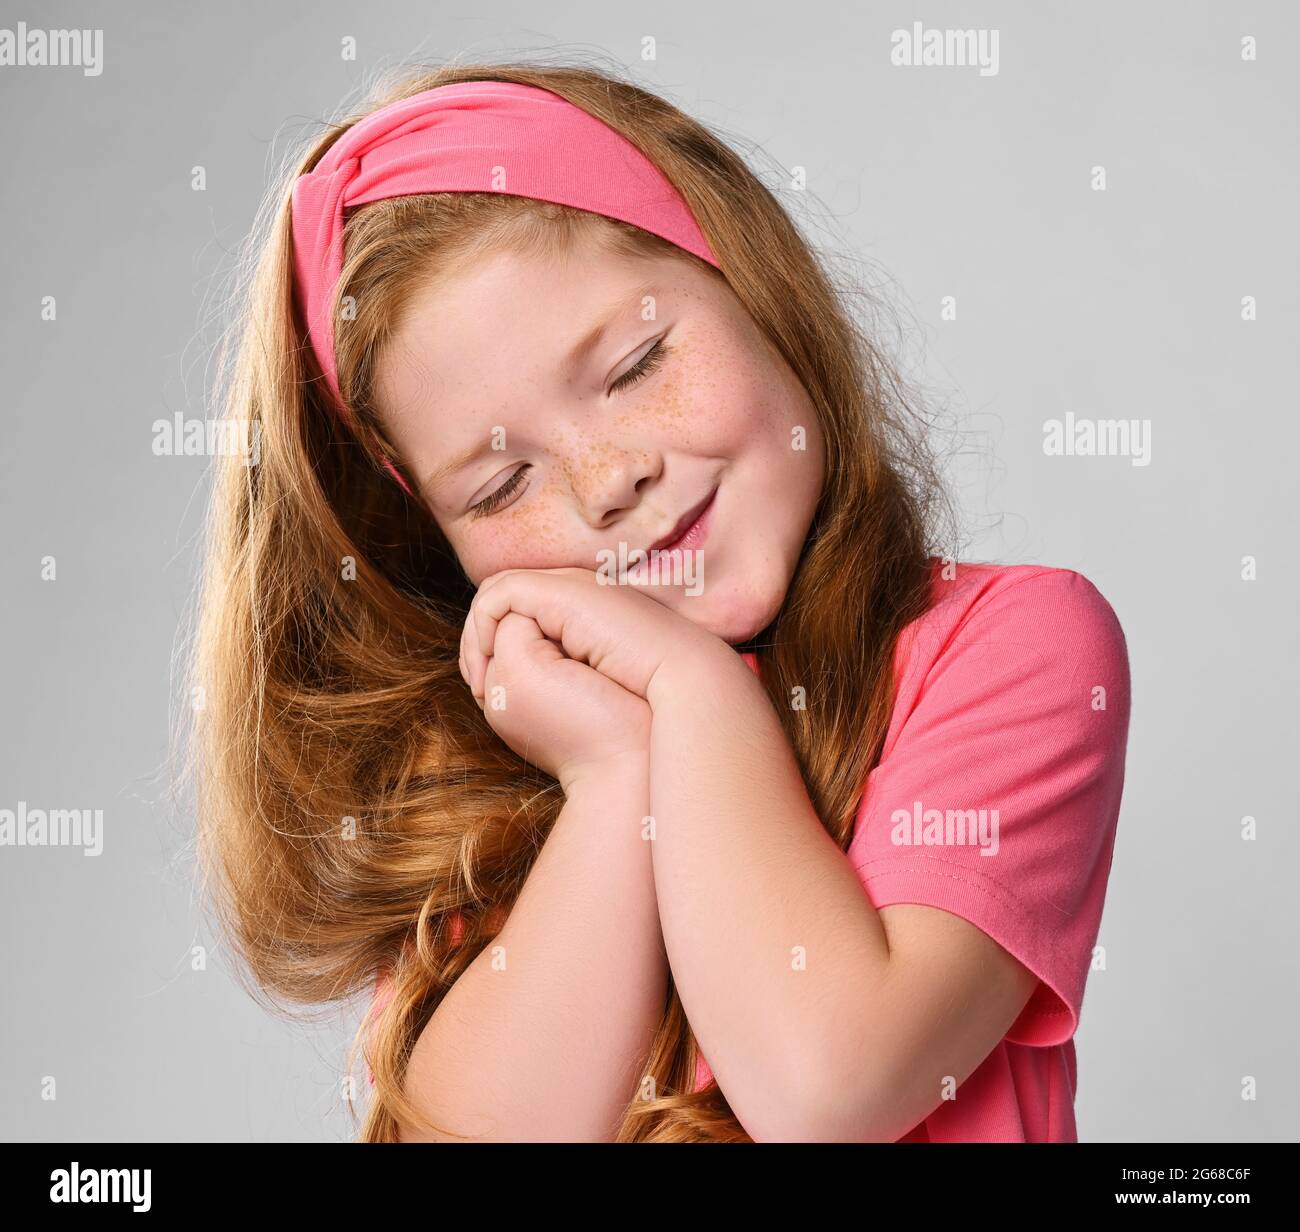 Portrait of cute daydreaming redhead kid girl in pink t-shirt and headband holding hands together, eyes closed Stock Photo